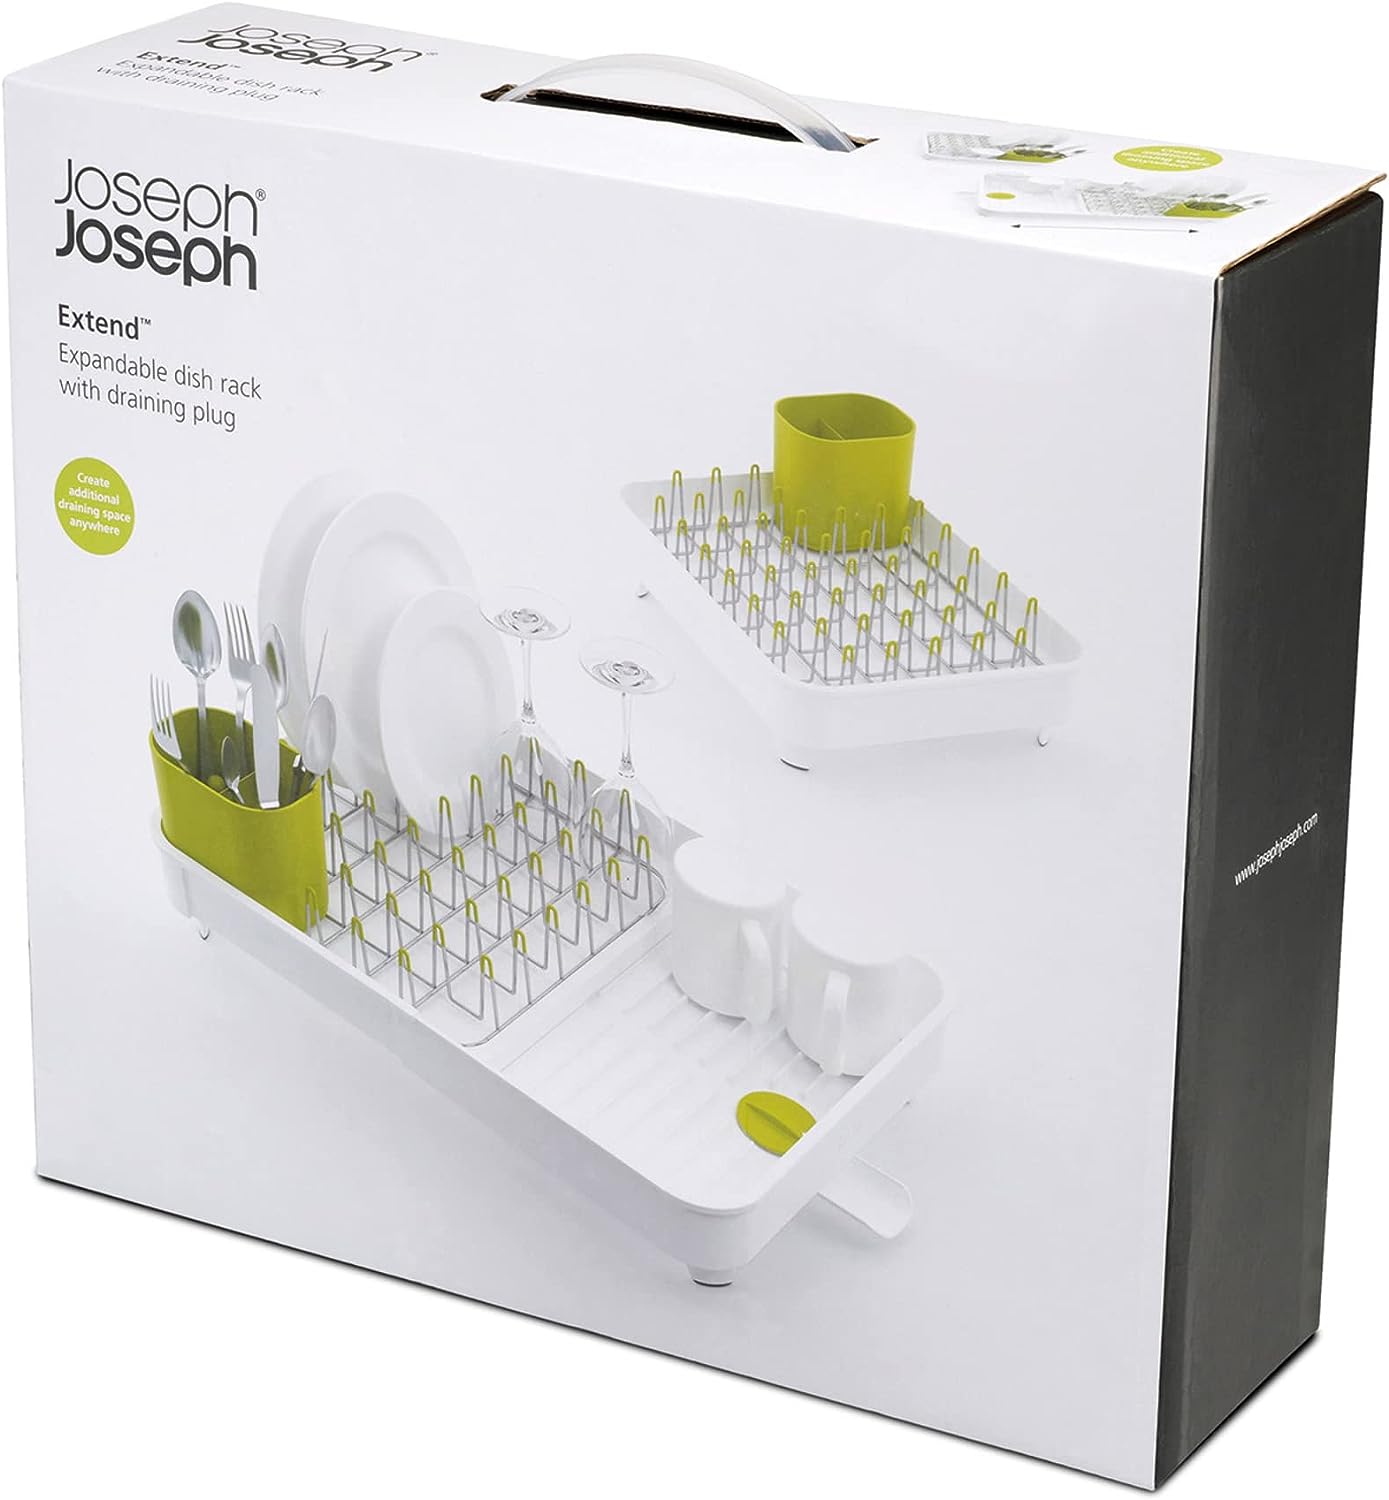 https://bigbigmart.com/wp-content/uploads/2023/10/Joseph-Joseph-85071-Extend-Expandable-Dish-Drying-Rack-and-Drainboard-Set-Foldaway-Integrated-Spout-Drainer-Removable-Steel-Rack-and-Cutlery-Holder-WhiteWhite-Green-Plastic6.jpg